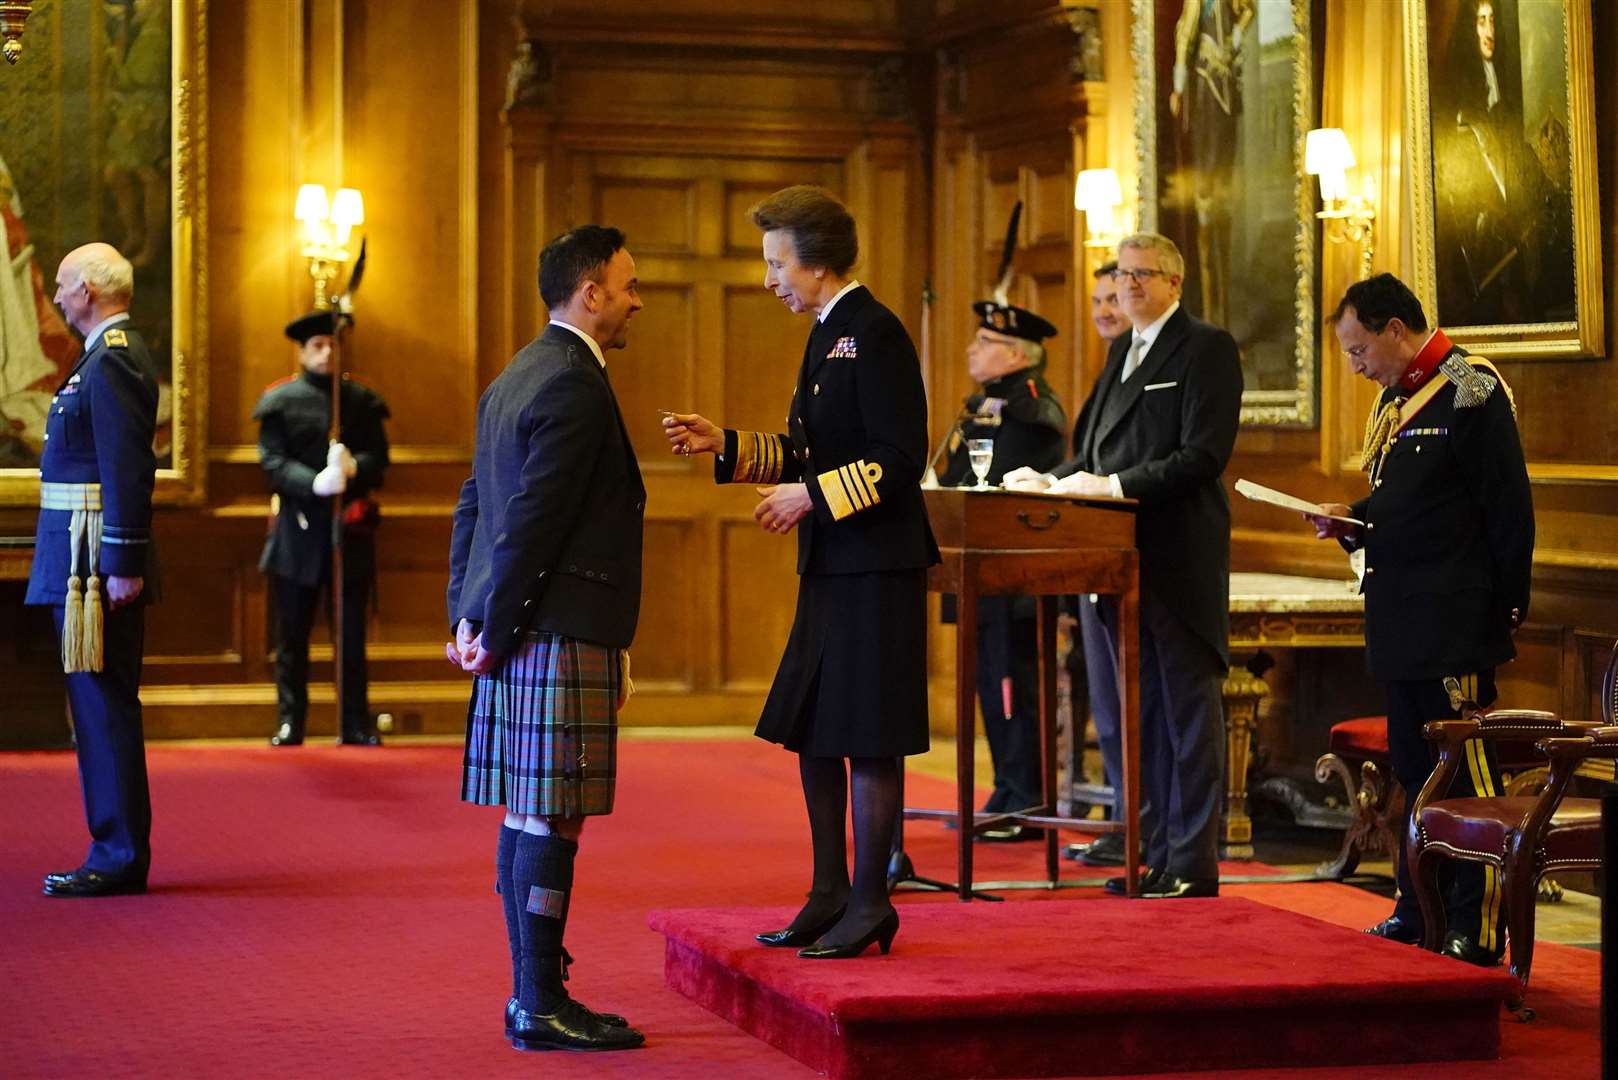 David Murdoch, head coach, British curling team, from Stirling, is made a MBE by the Princess Royal at the Palace of Holyroodhouse, Edinburgh, for services to curling (Jane Barlow/PA)